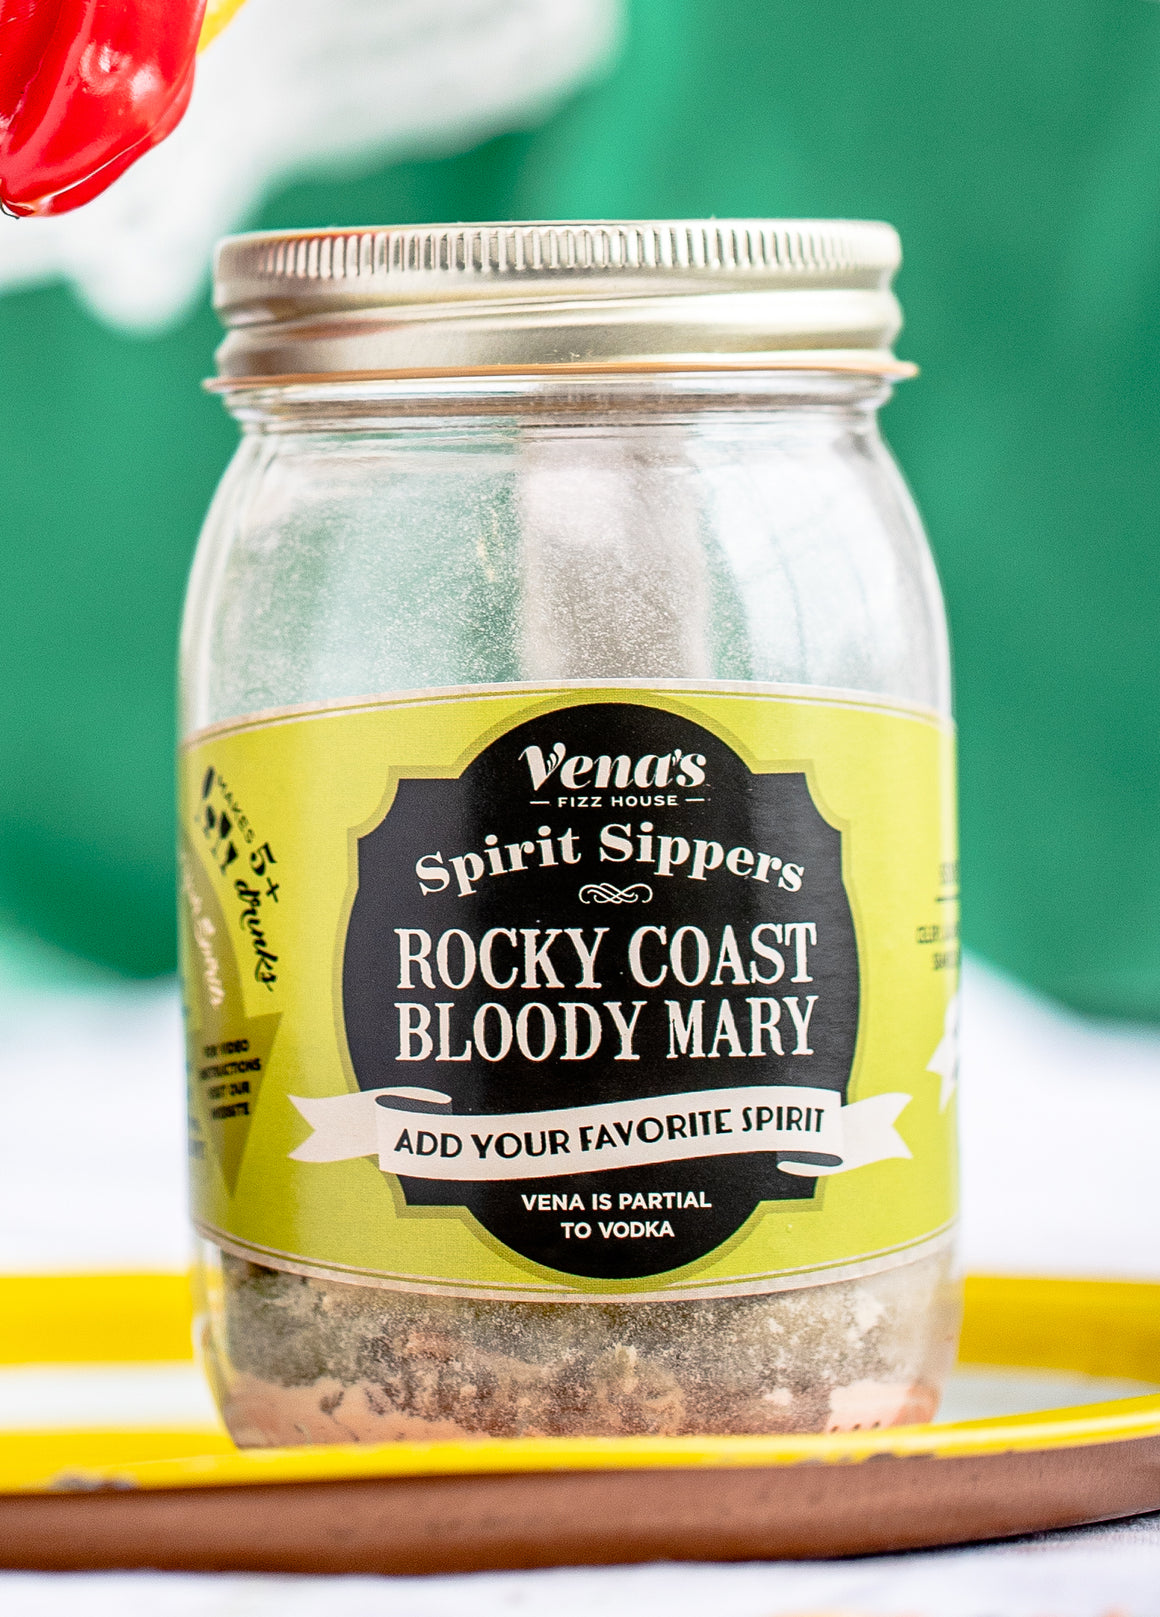 ROCKY COAST BLOODY MARY SPIRIT SIPPER COCKTAIL INFUSION ($174.00 Retail/$104.40 WS)